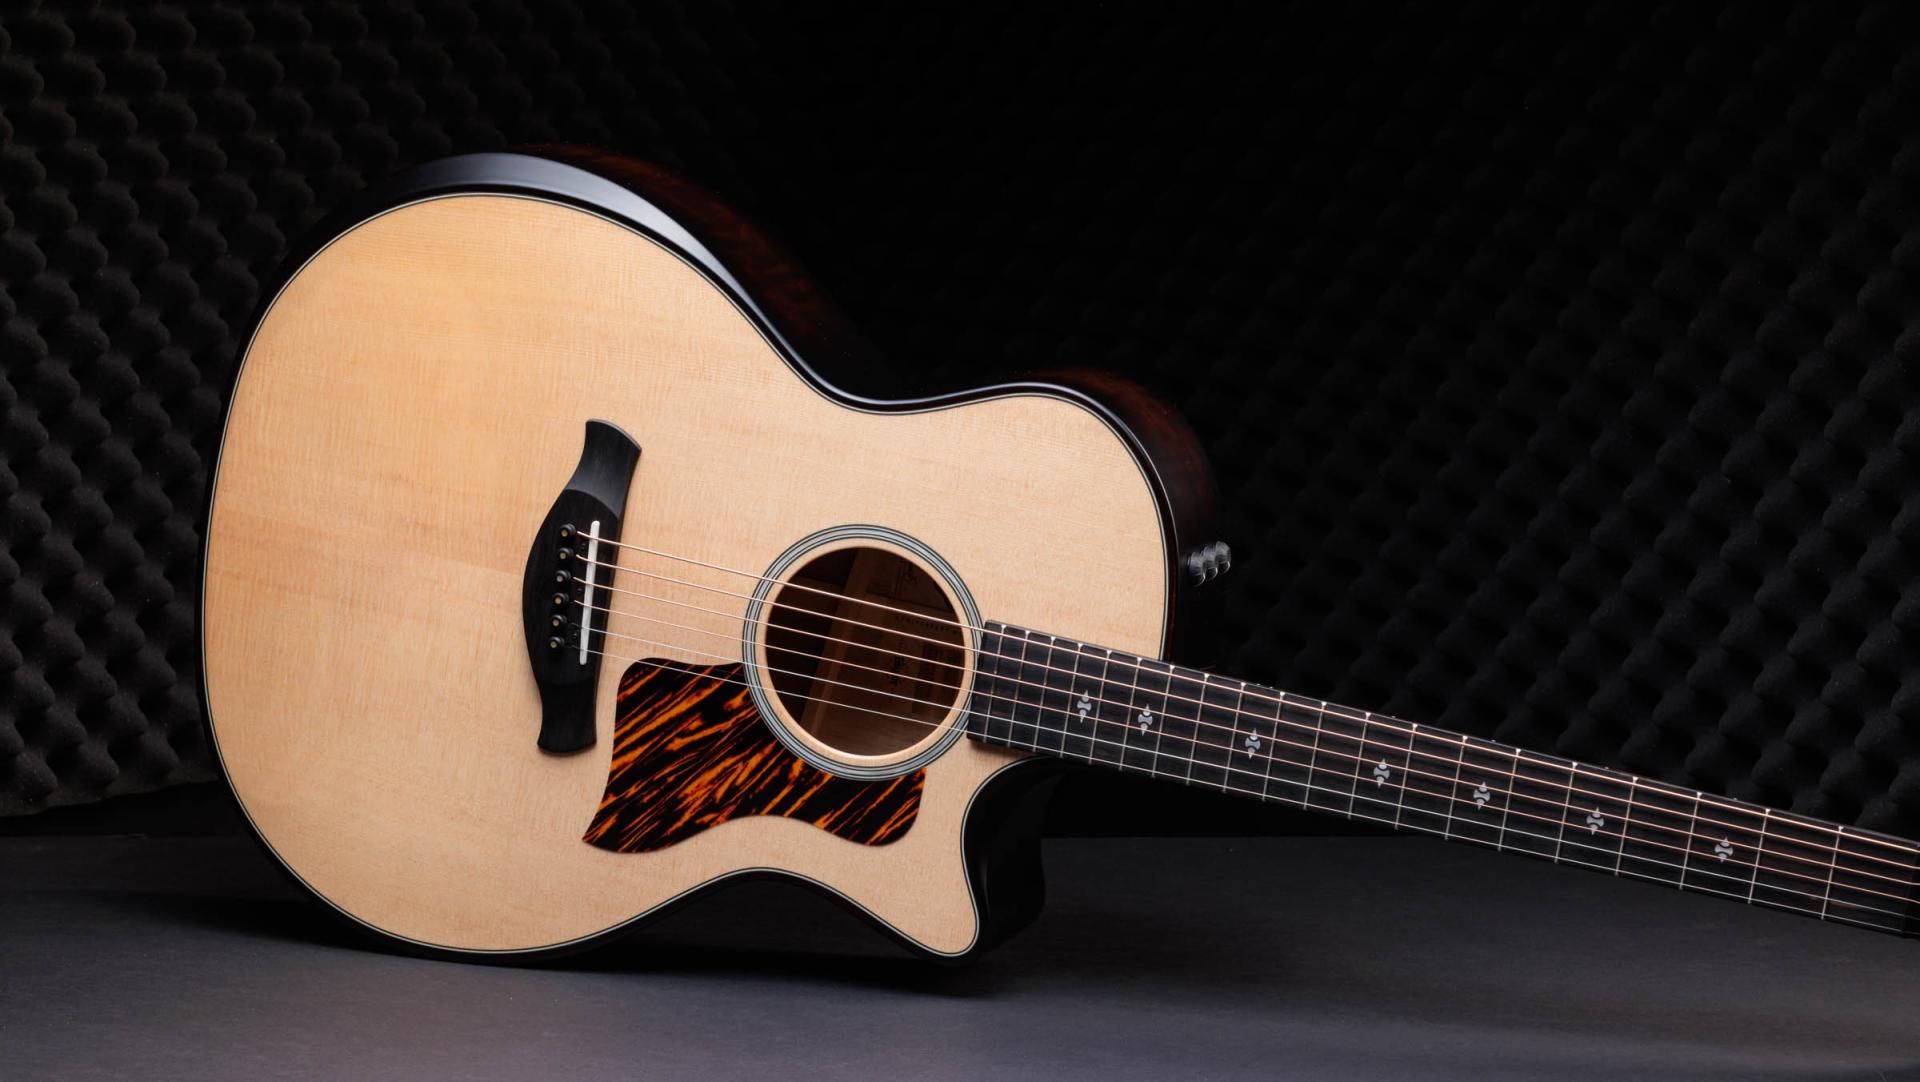 Taylor 50th Anniversary Builder's Edition 314ce LTD - Natural